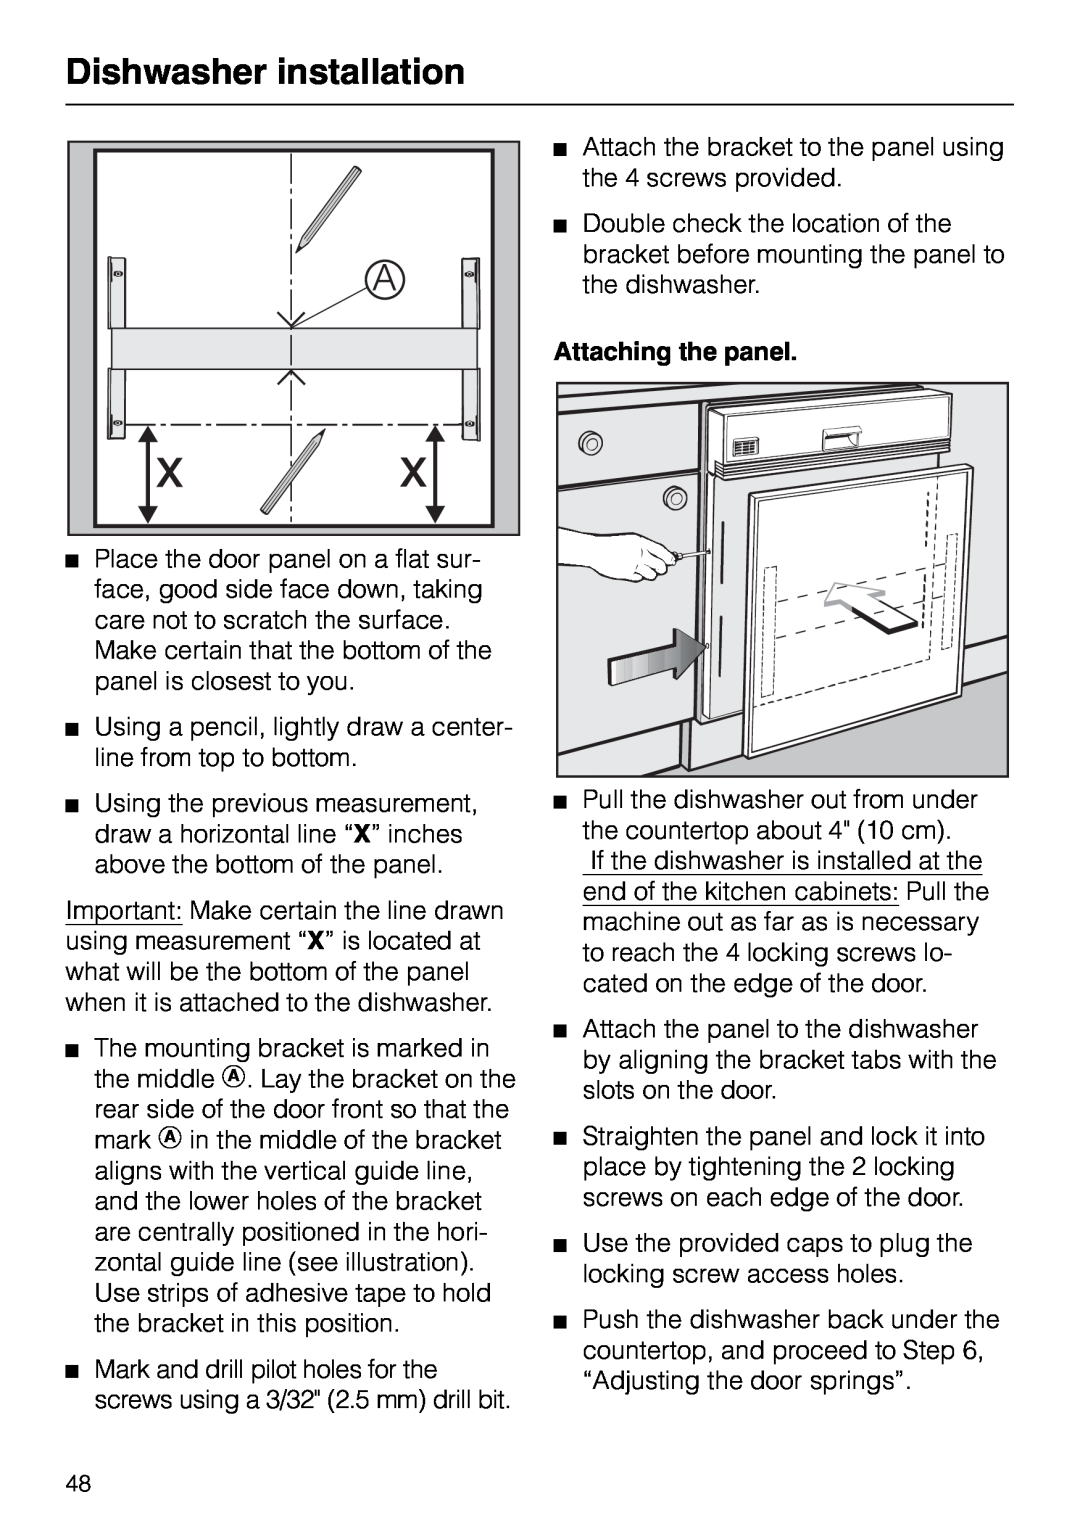 Miele M.-NR. 04 390 922 operating instructions Dishwasher installation, Attaching the panel 